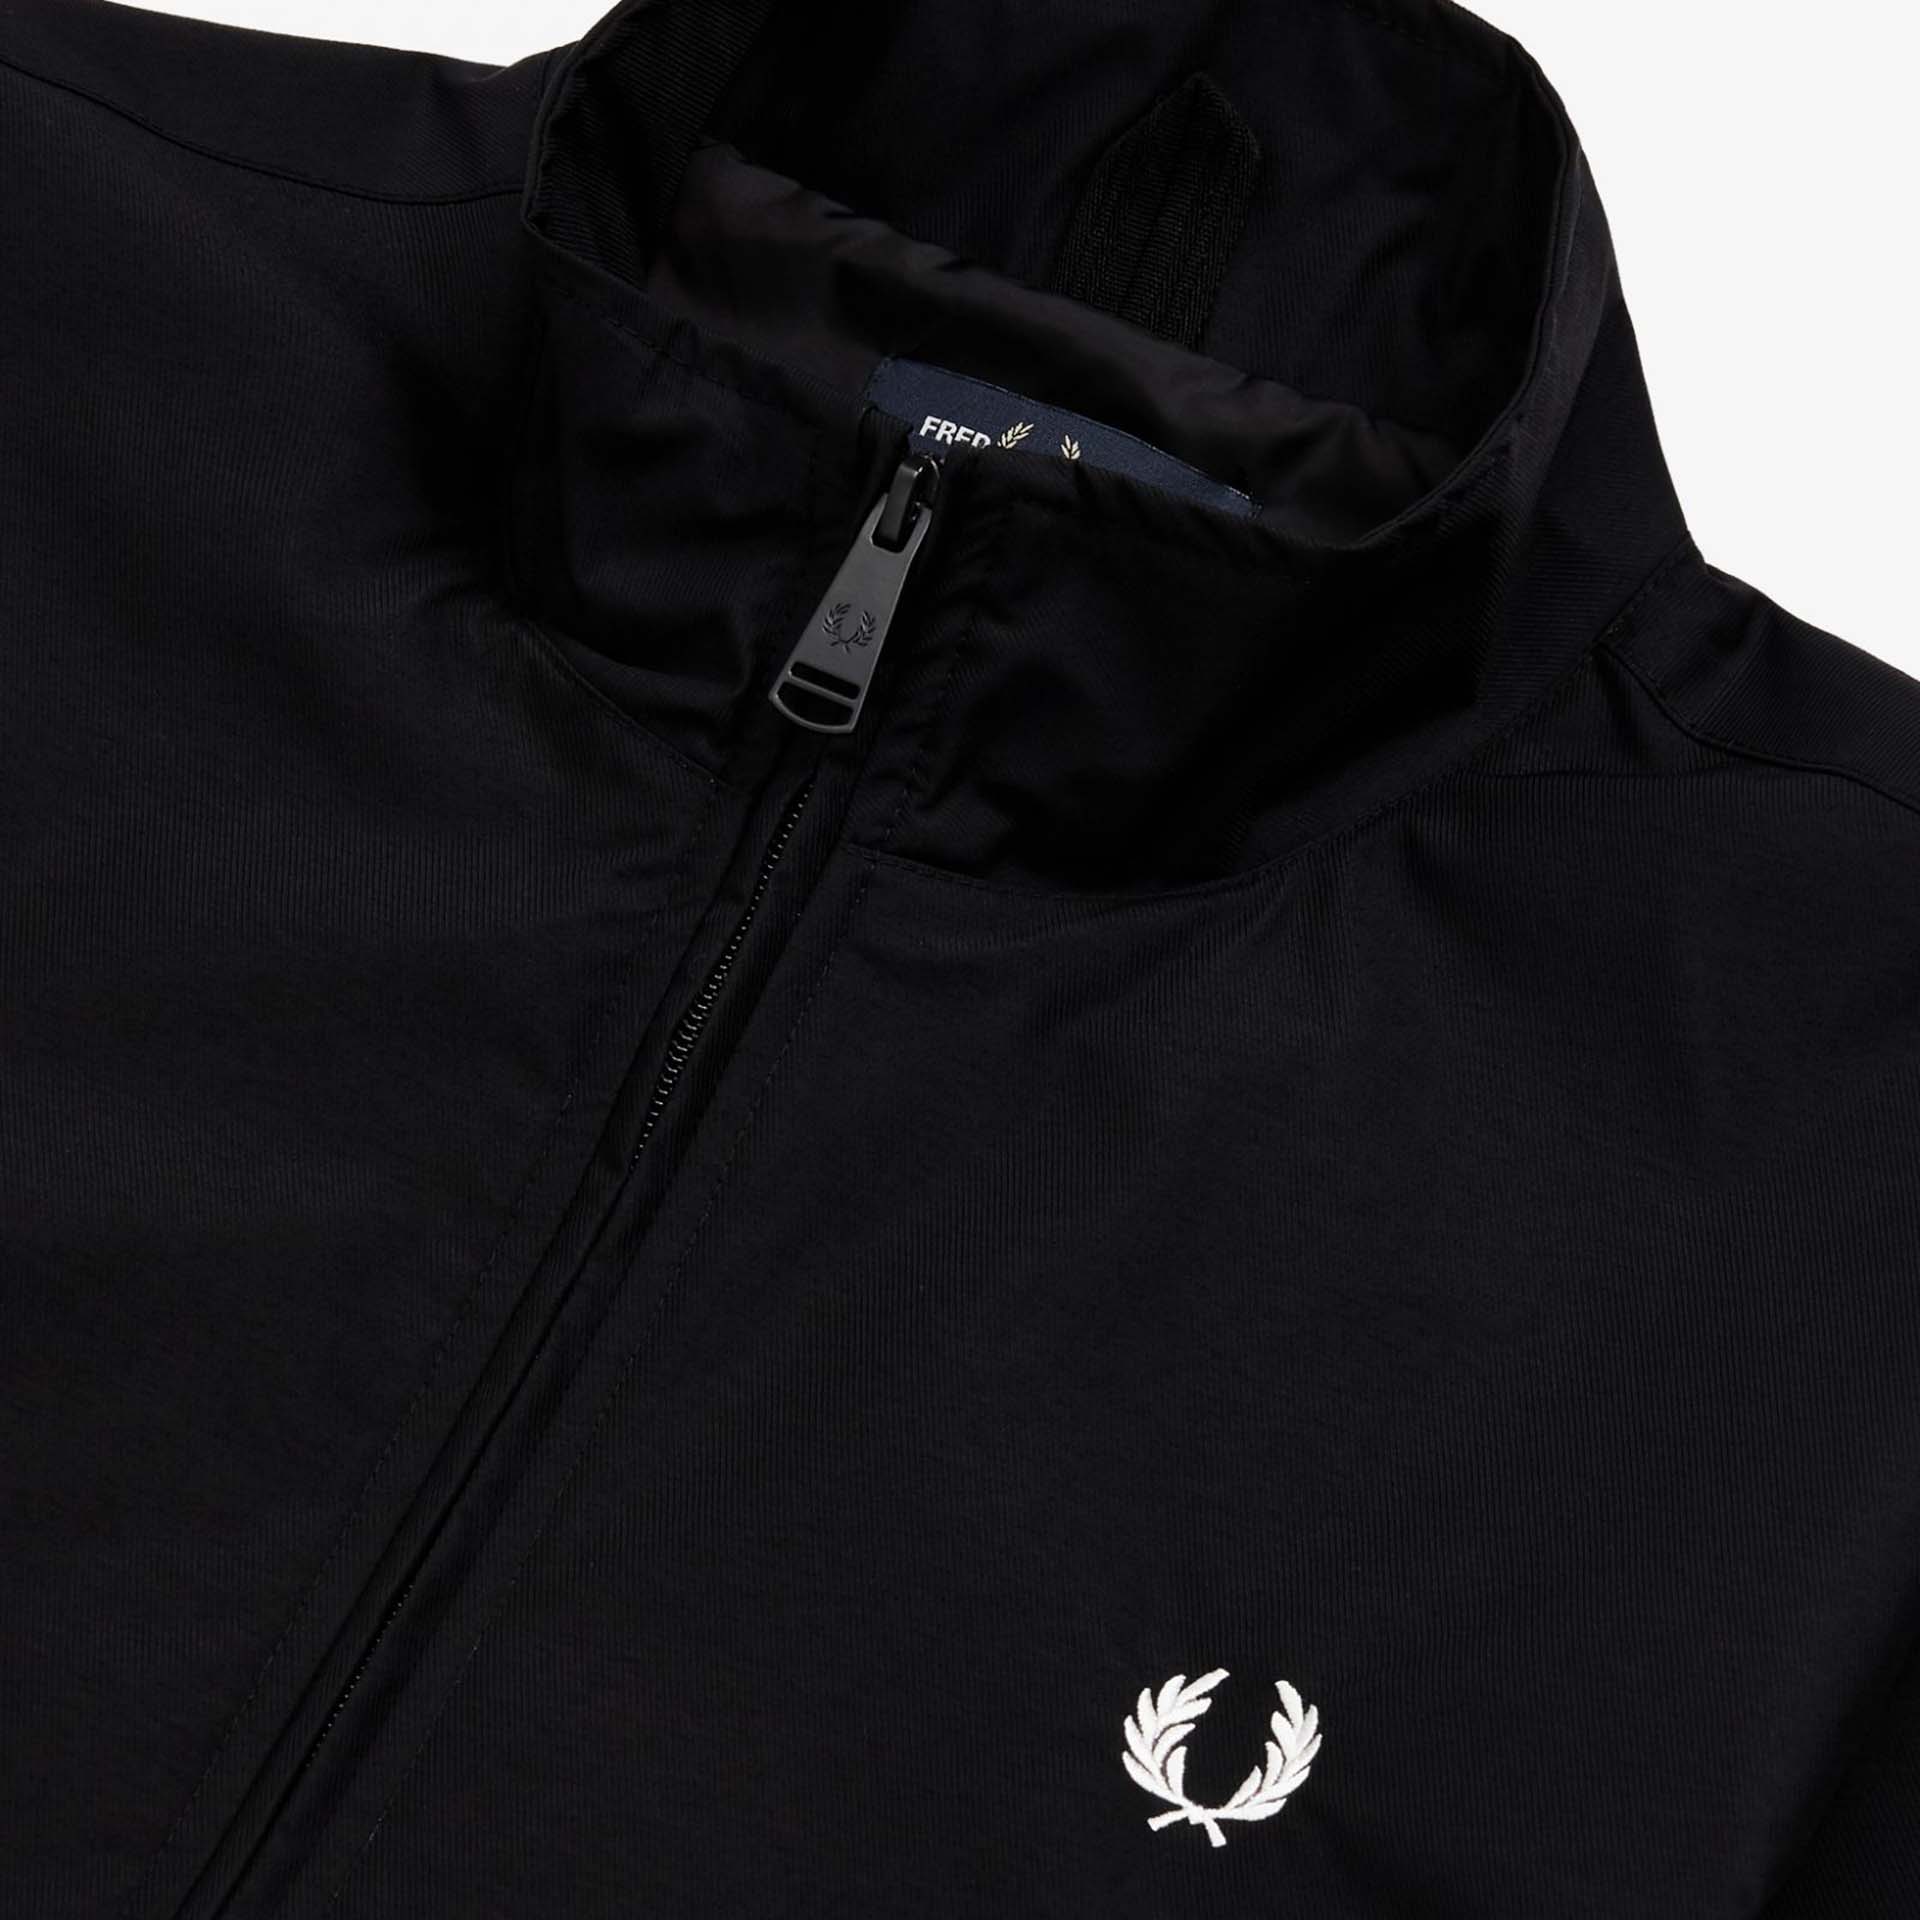 Fred Perry Brentham Jacket Black